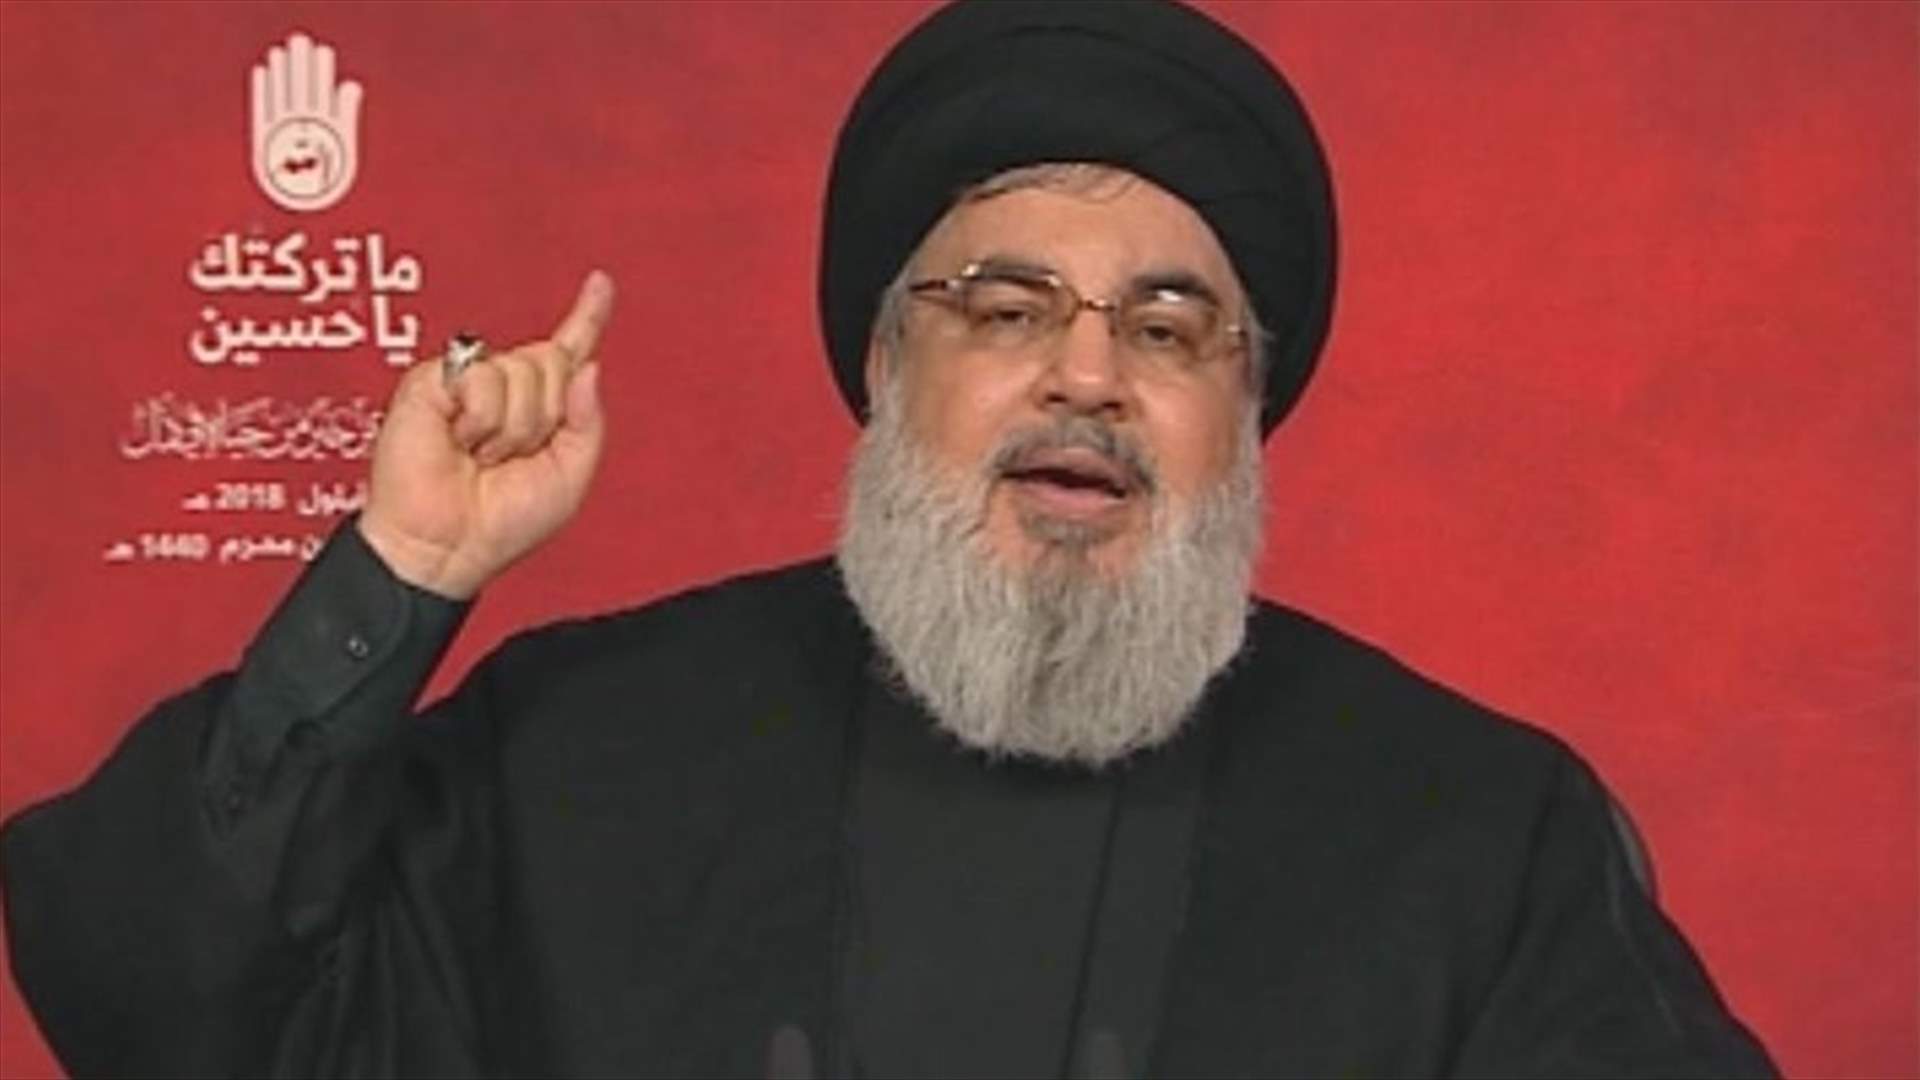 Nasrallah says Hezbollah will stay in Syria, even after settlement in Idlib